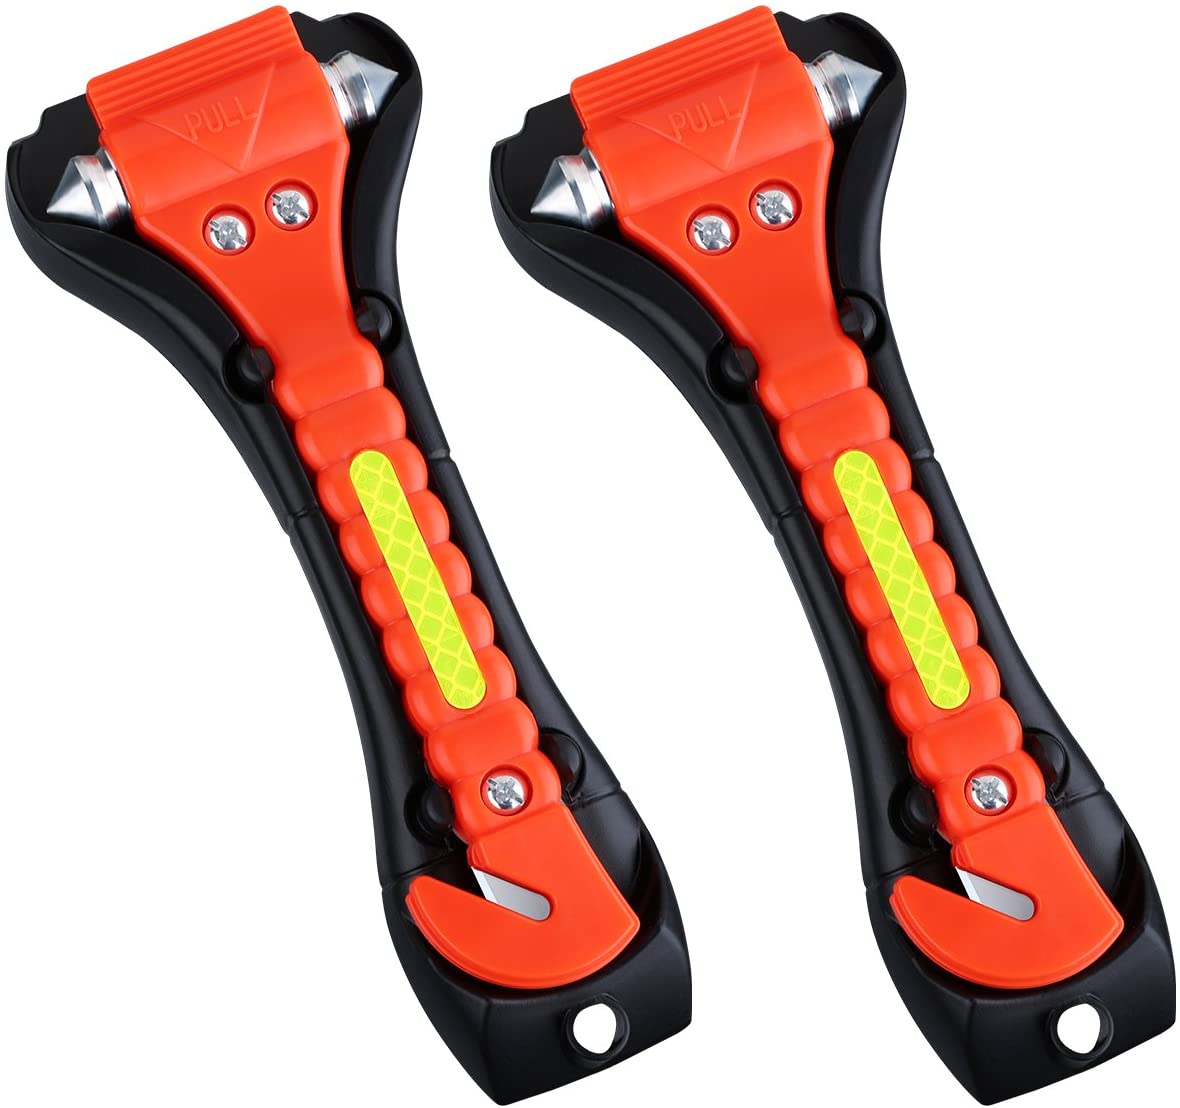 VicTsing 2 Pack Car Safety Hammer, Emergency Escape Tool with Car Window Breaker and Seat Belt Cutter, Life Saving Survival Kit